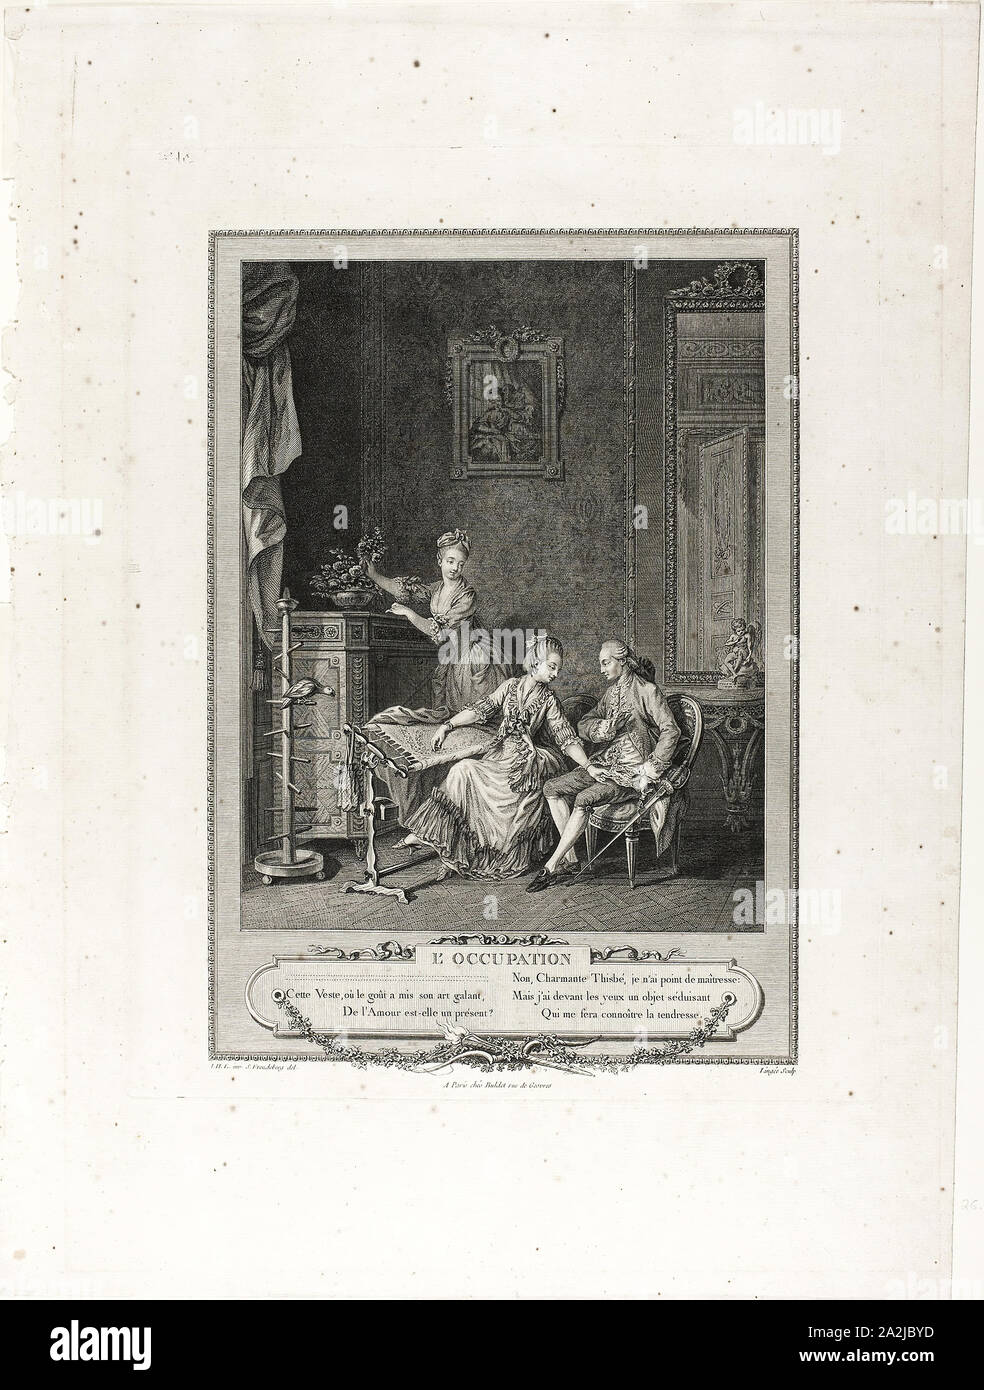 The Occupation, from Monument du Costume Physique et Moral de la fin du Dix-huitième siècle, 1774, Charles Louis Lingée (French, 1748-1819), after Sigmund Freudeberg (Swiss, 1745-1801) and Jean Henri Eberts (Swiss, 18th century), published by Laurent-François Prault (French 1712-1780), France, Engraving on paper, 285 × 223 mm (image), 405 × 321 mm (plate), 550 × 413 mm (sheet Stock Photo